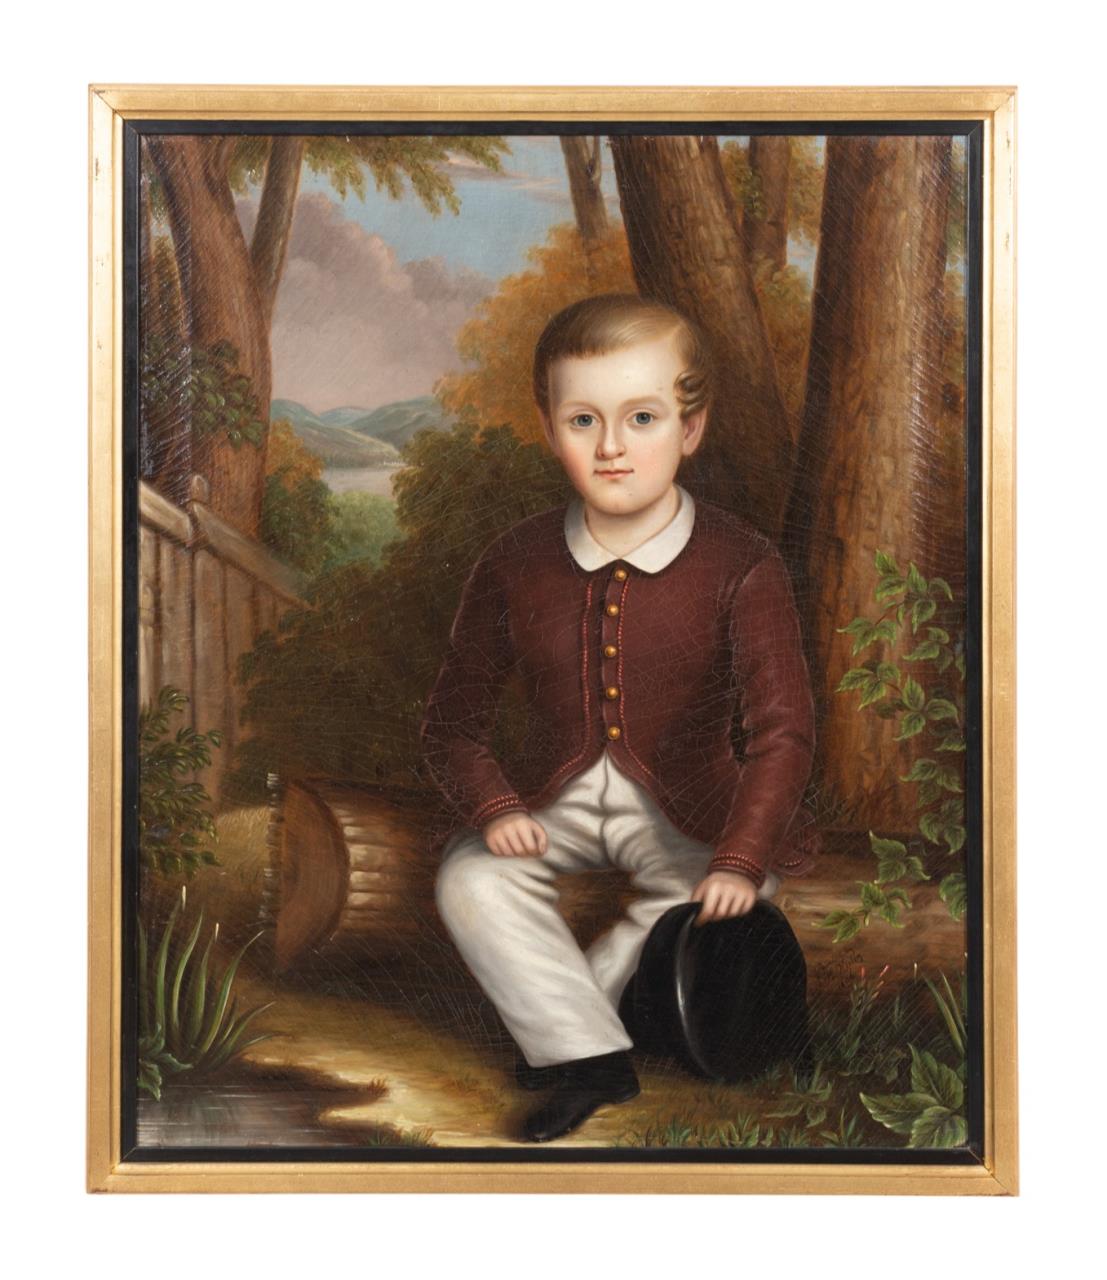 ISAAC KEELEY, PORTRAIT OF A YOUNG